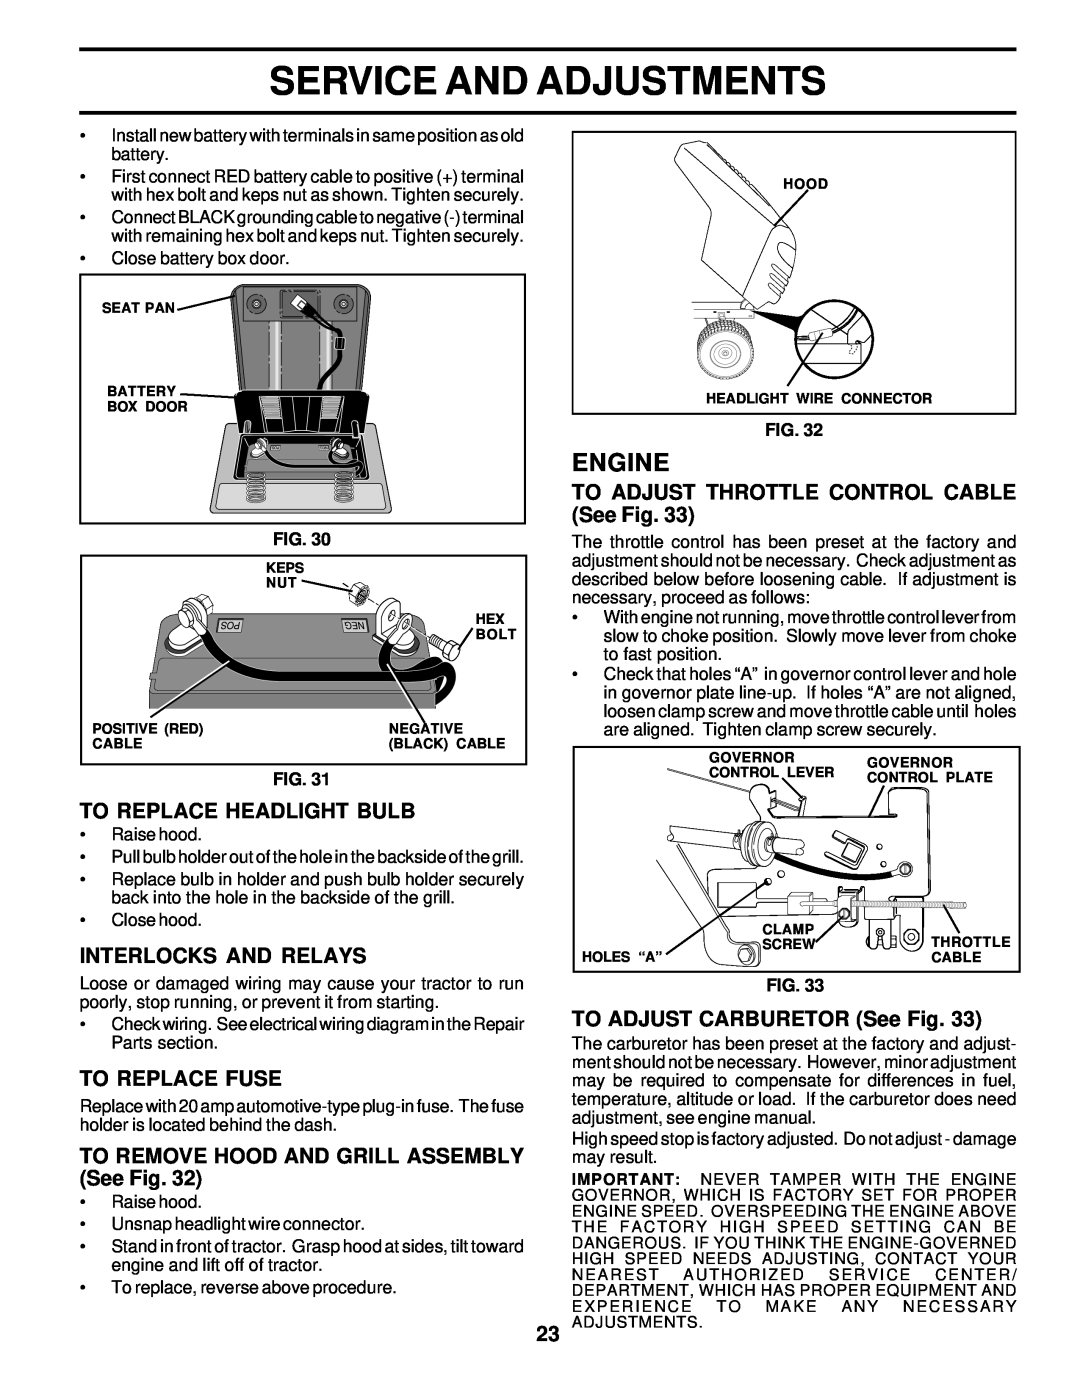 Poulan 178219 To Replace Headlight Bulb, Interlocks And Relays, To Replace Fuse, TO REMOVE HOOD AND GRILL ASSEMBLY See Fig 